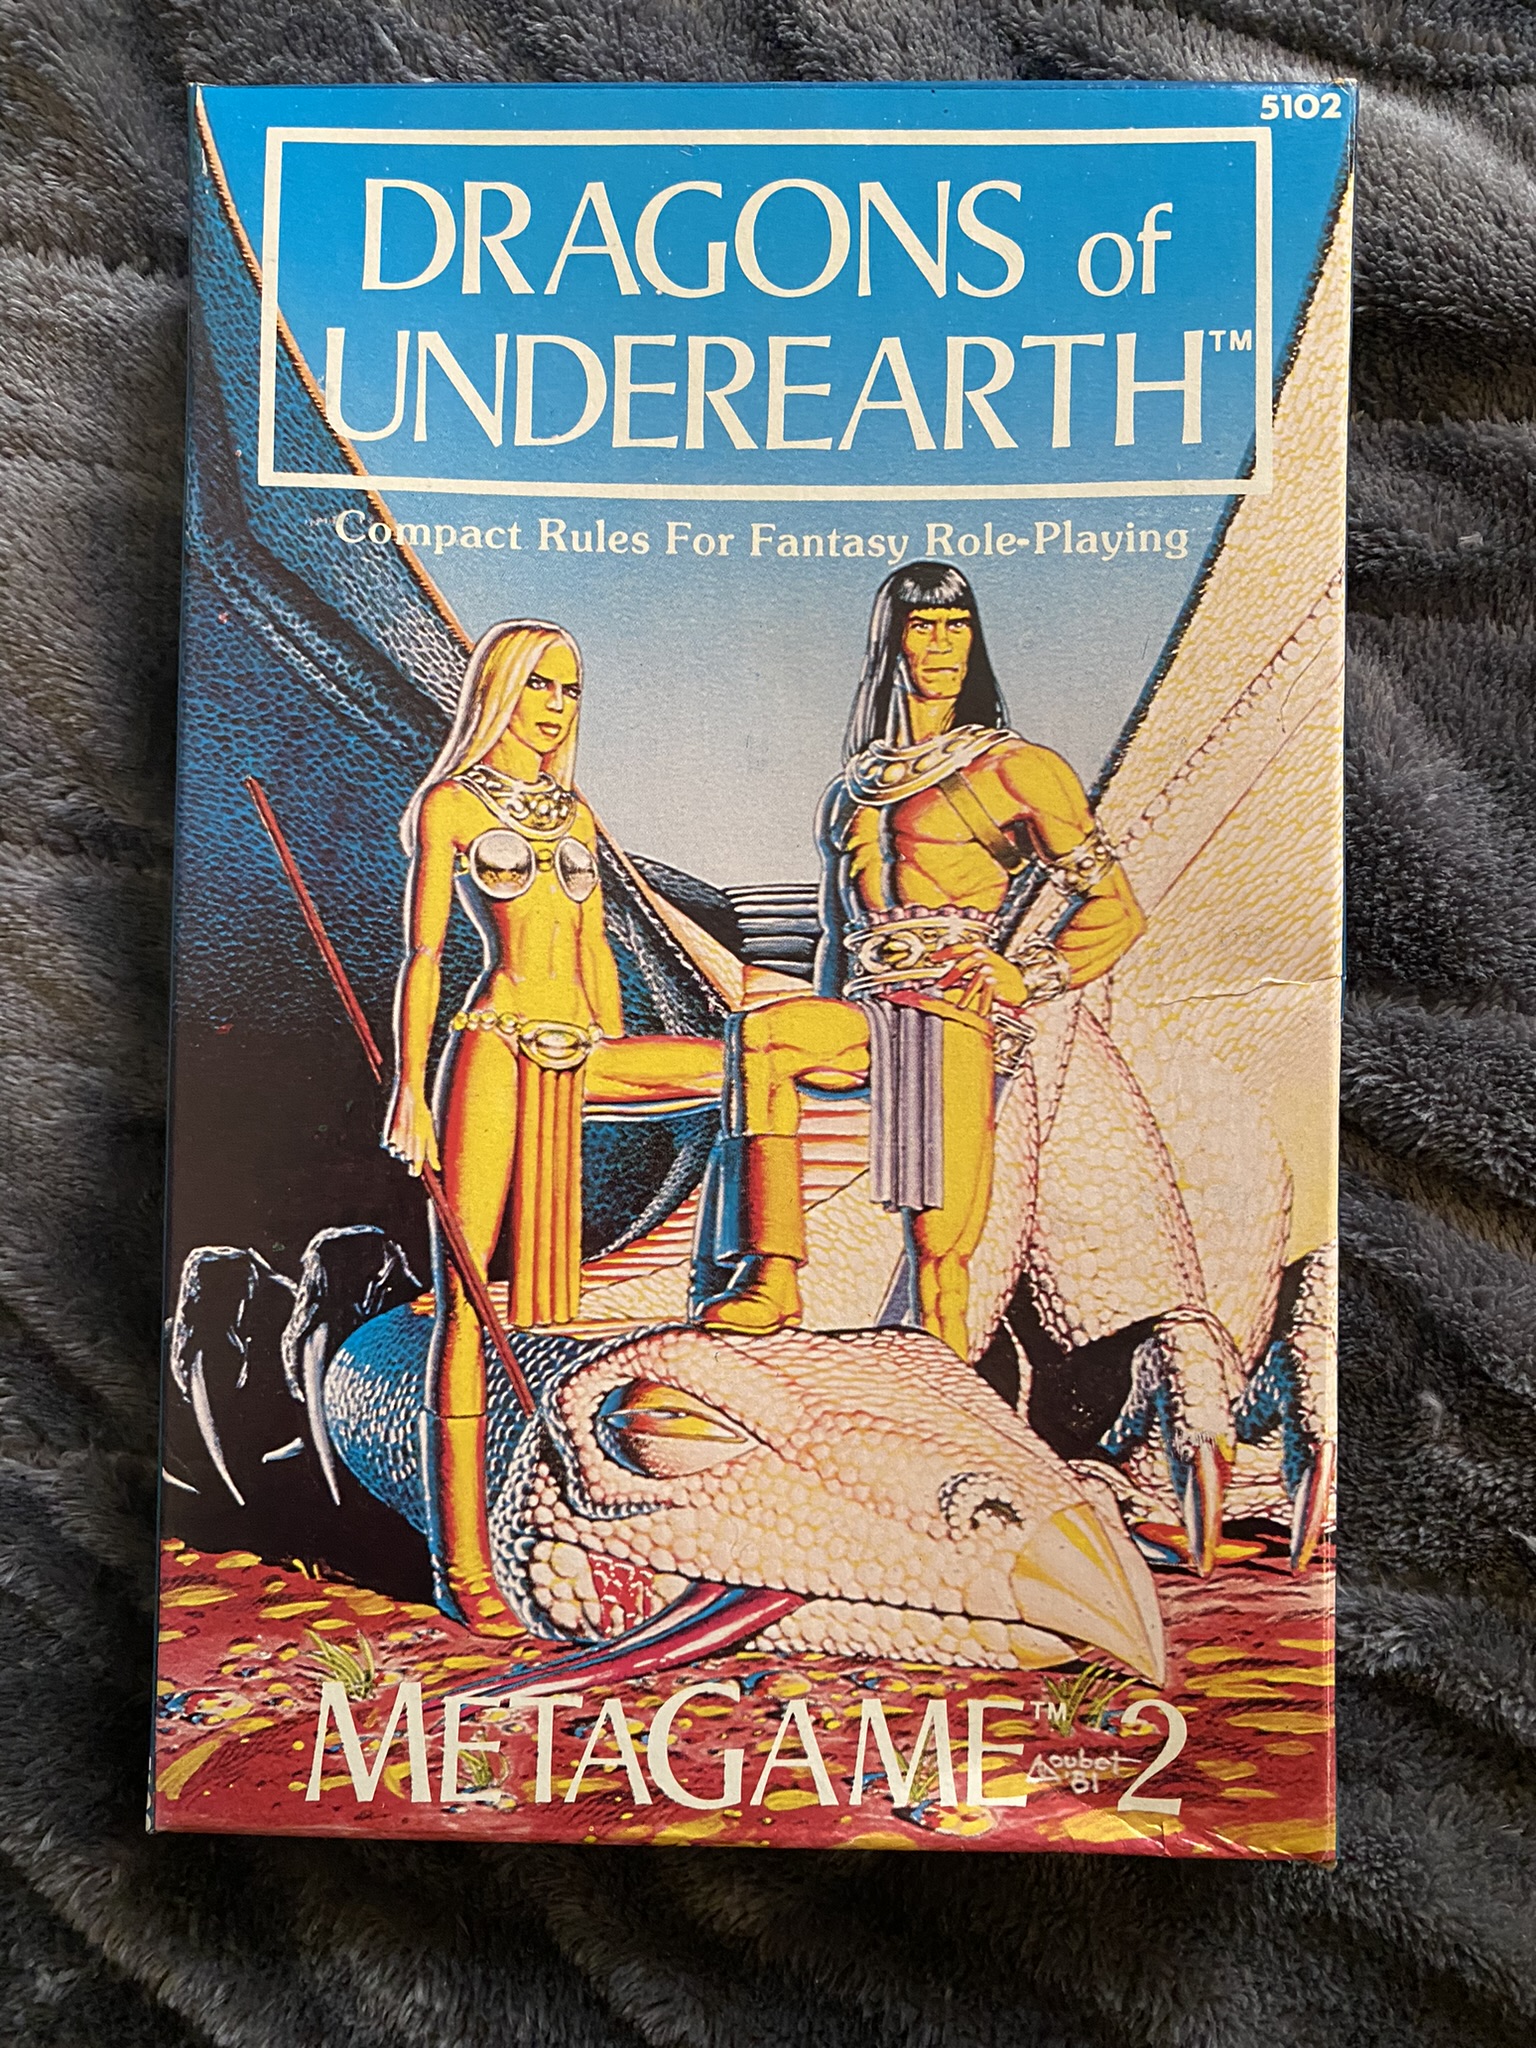 Dragons of Underearth, front cover